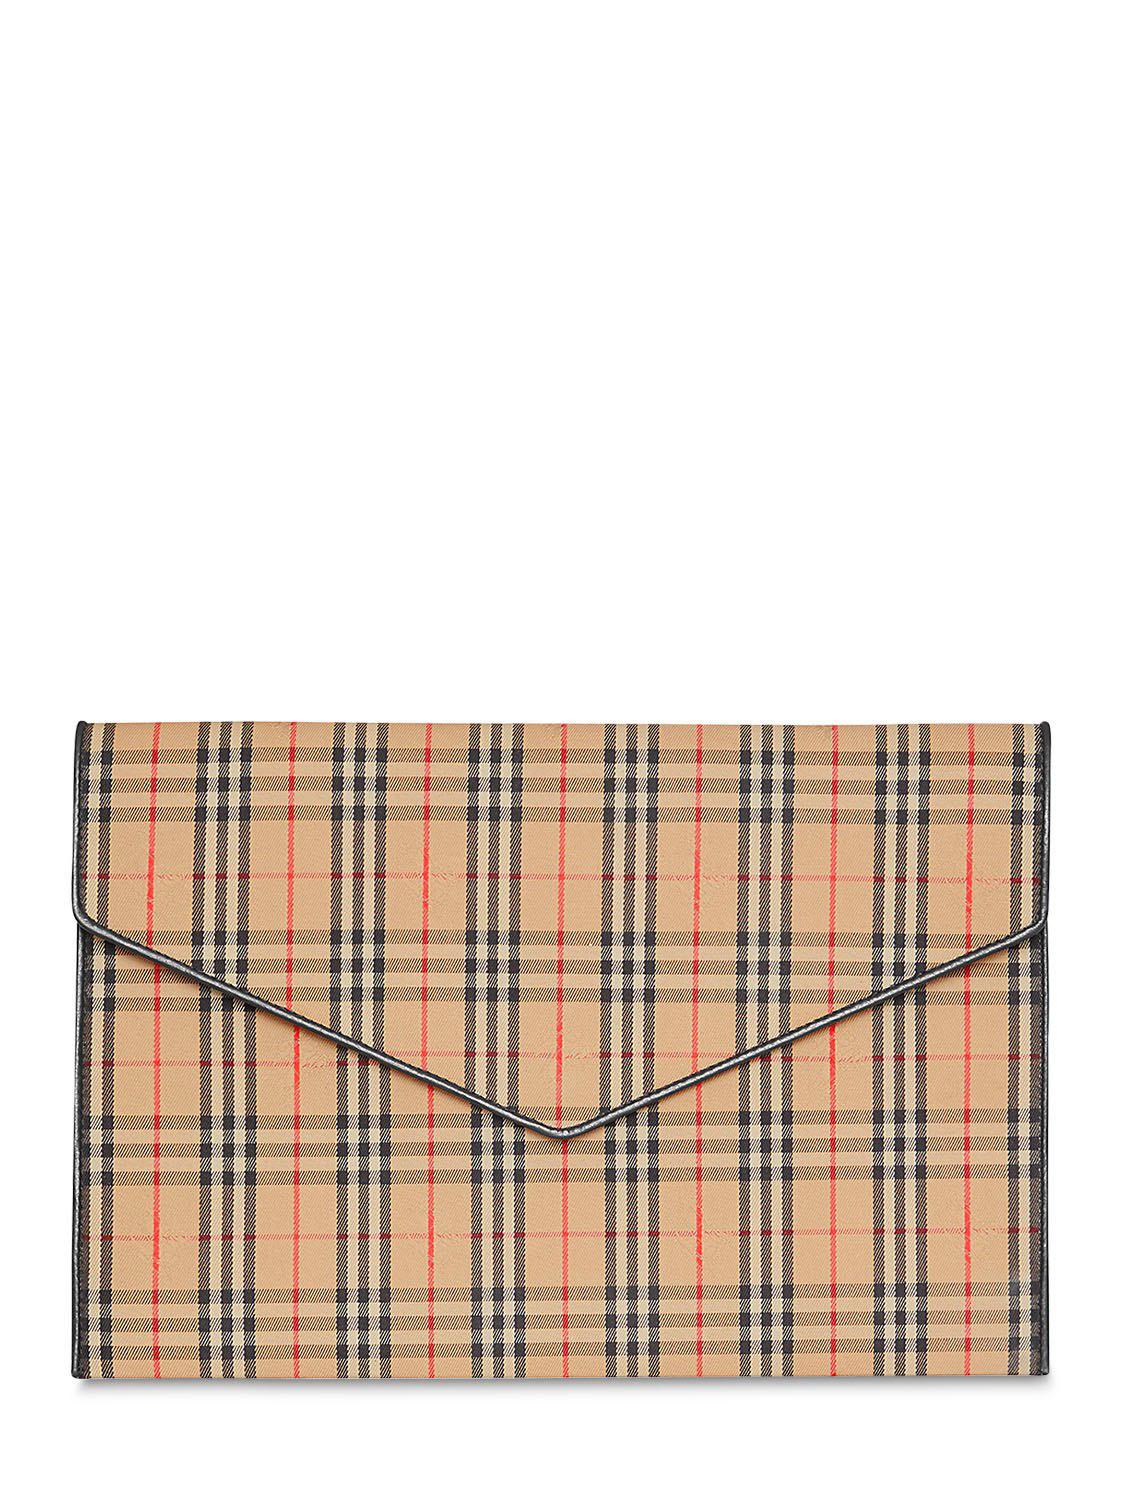 burberry large clutch